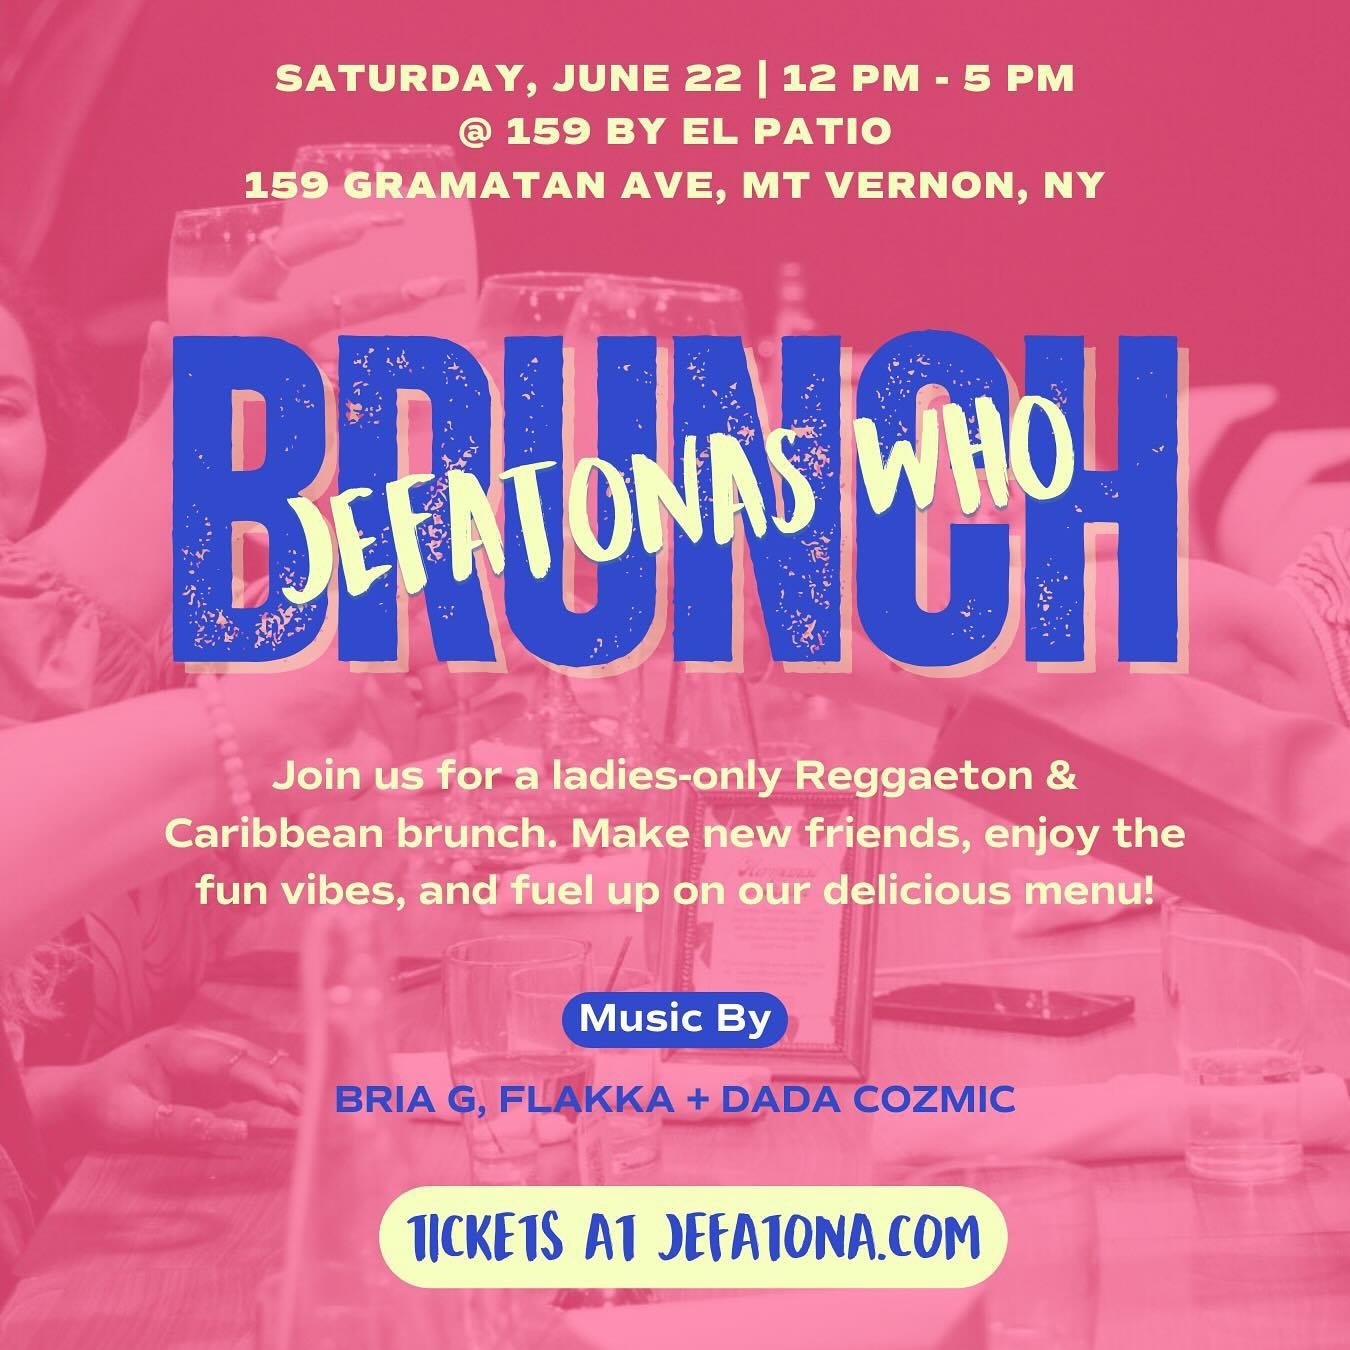 We are so excited to announce we will be joining forces with @elpatiotruck to host our FIRST EVER JEFATONA BRUNCH! 🥂 

I hope you&rsquo;re ready for the ultimate brunch experience created FOR US BY US! 😏

Join us for a ladies-only Reggaeton &amp; C